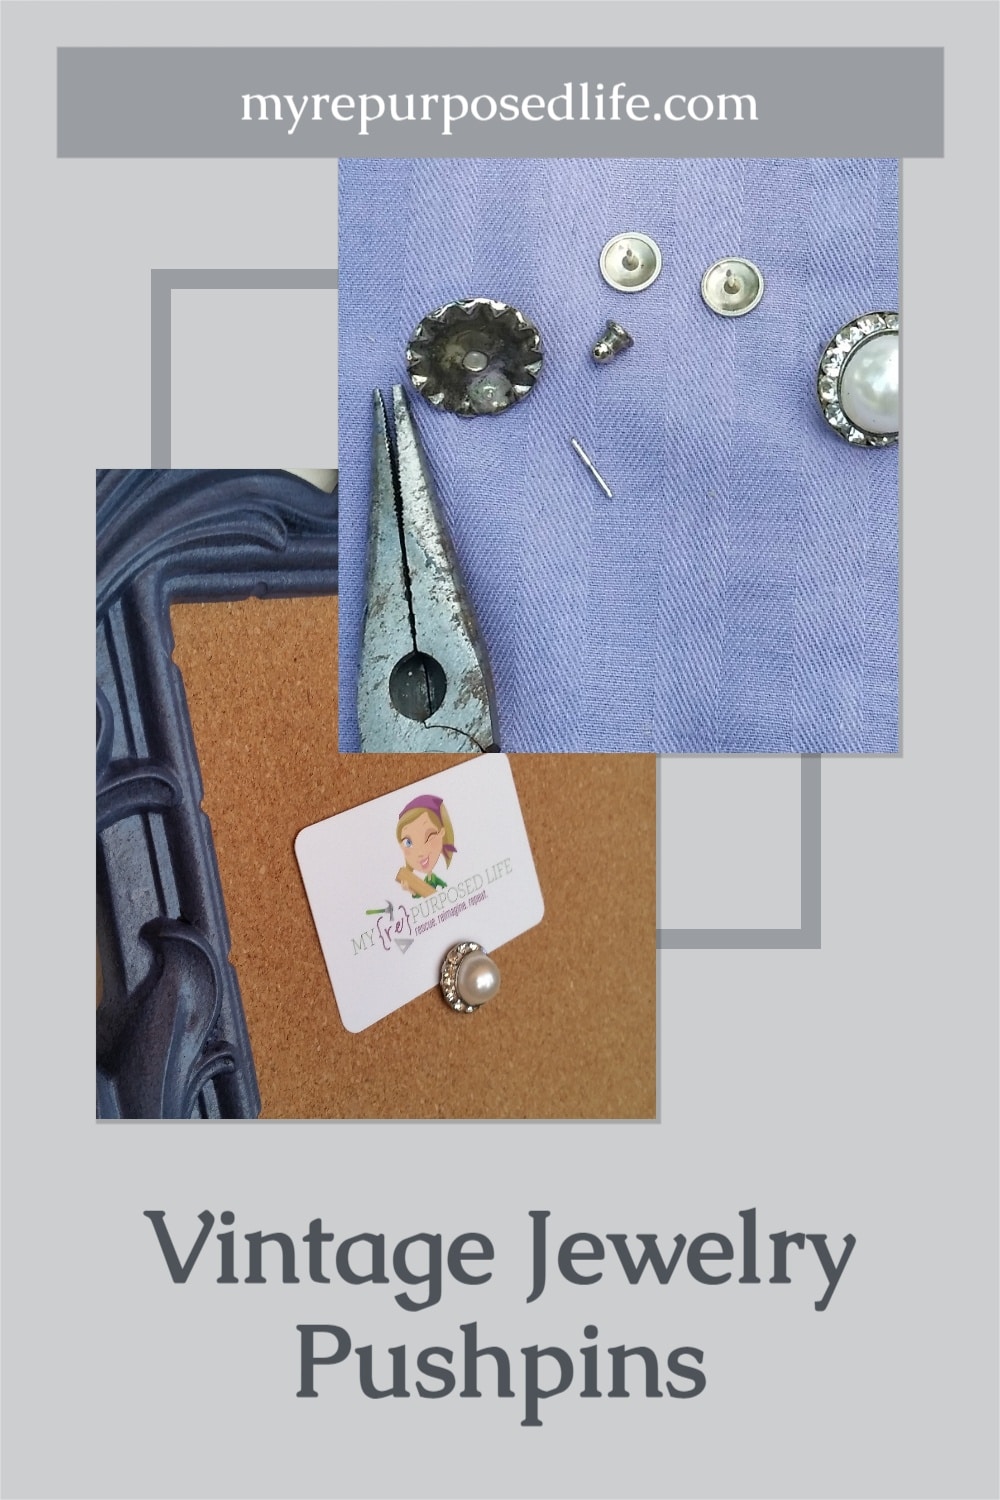 How to make vintage jewelry pushpins for your fancy memo cork board. Easy project to do with estate jewelry or granny's old earrings. #MyRepurposedLife #upcycle #vintage #jewelry #pushpin #project via @repurposedlife